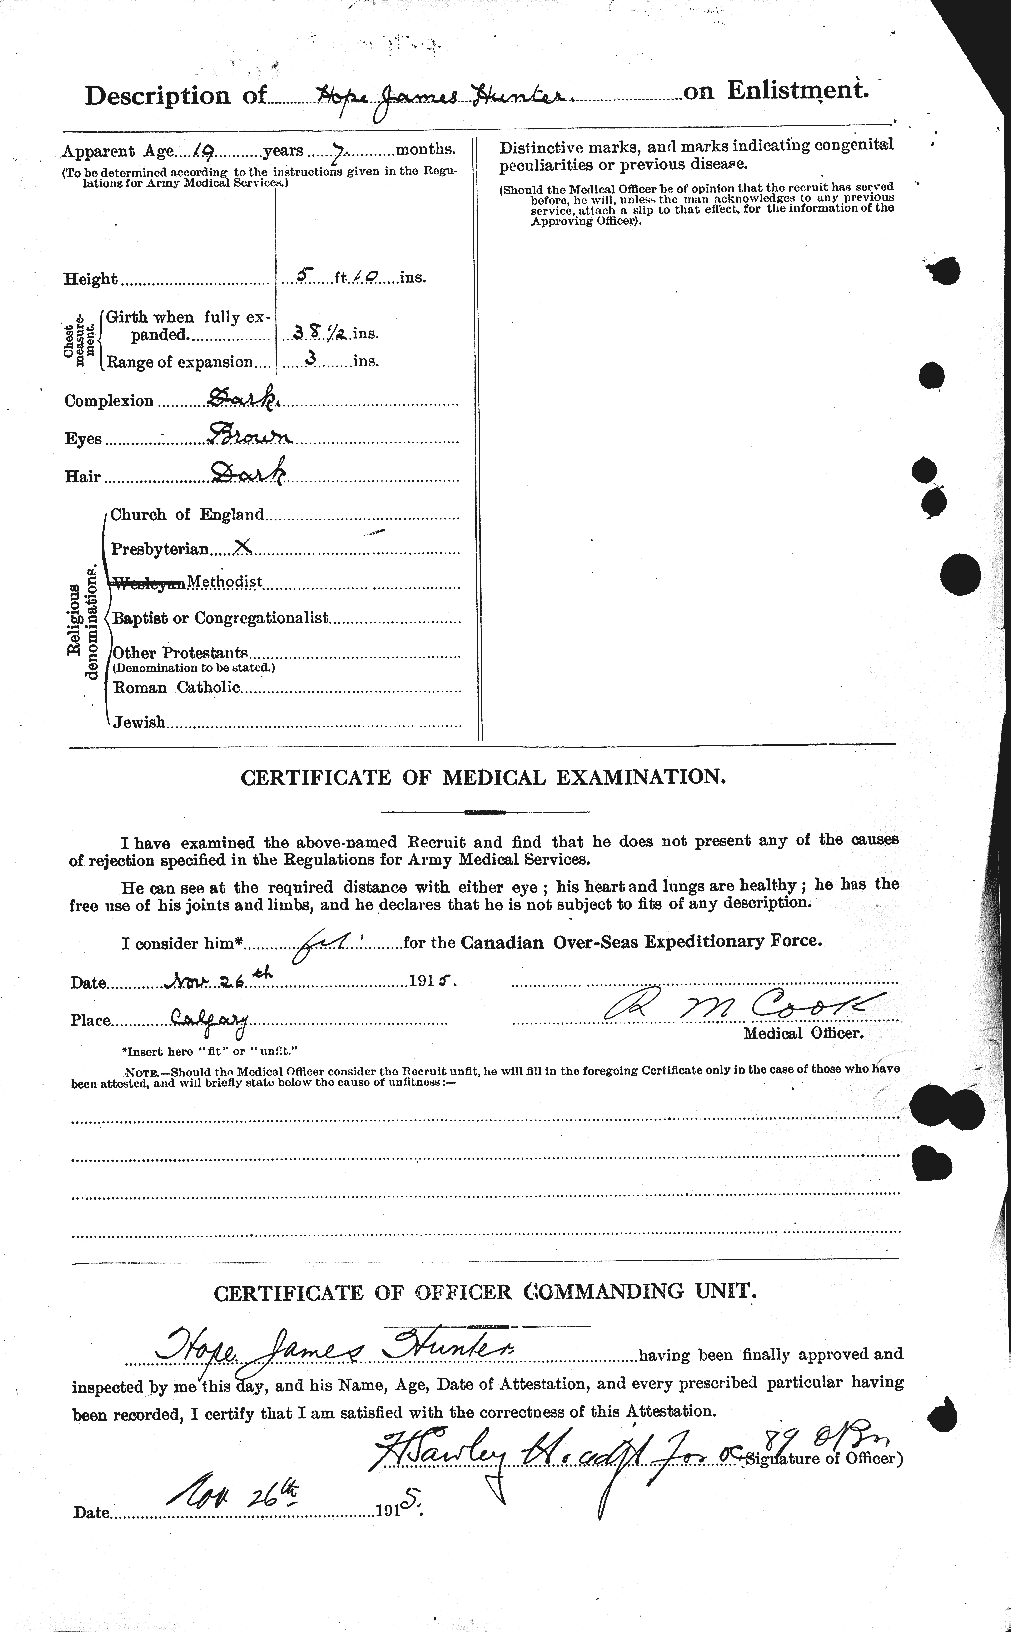 Personnel Records of the First World War - CEF 409207b